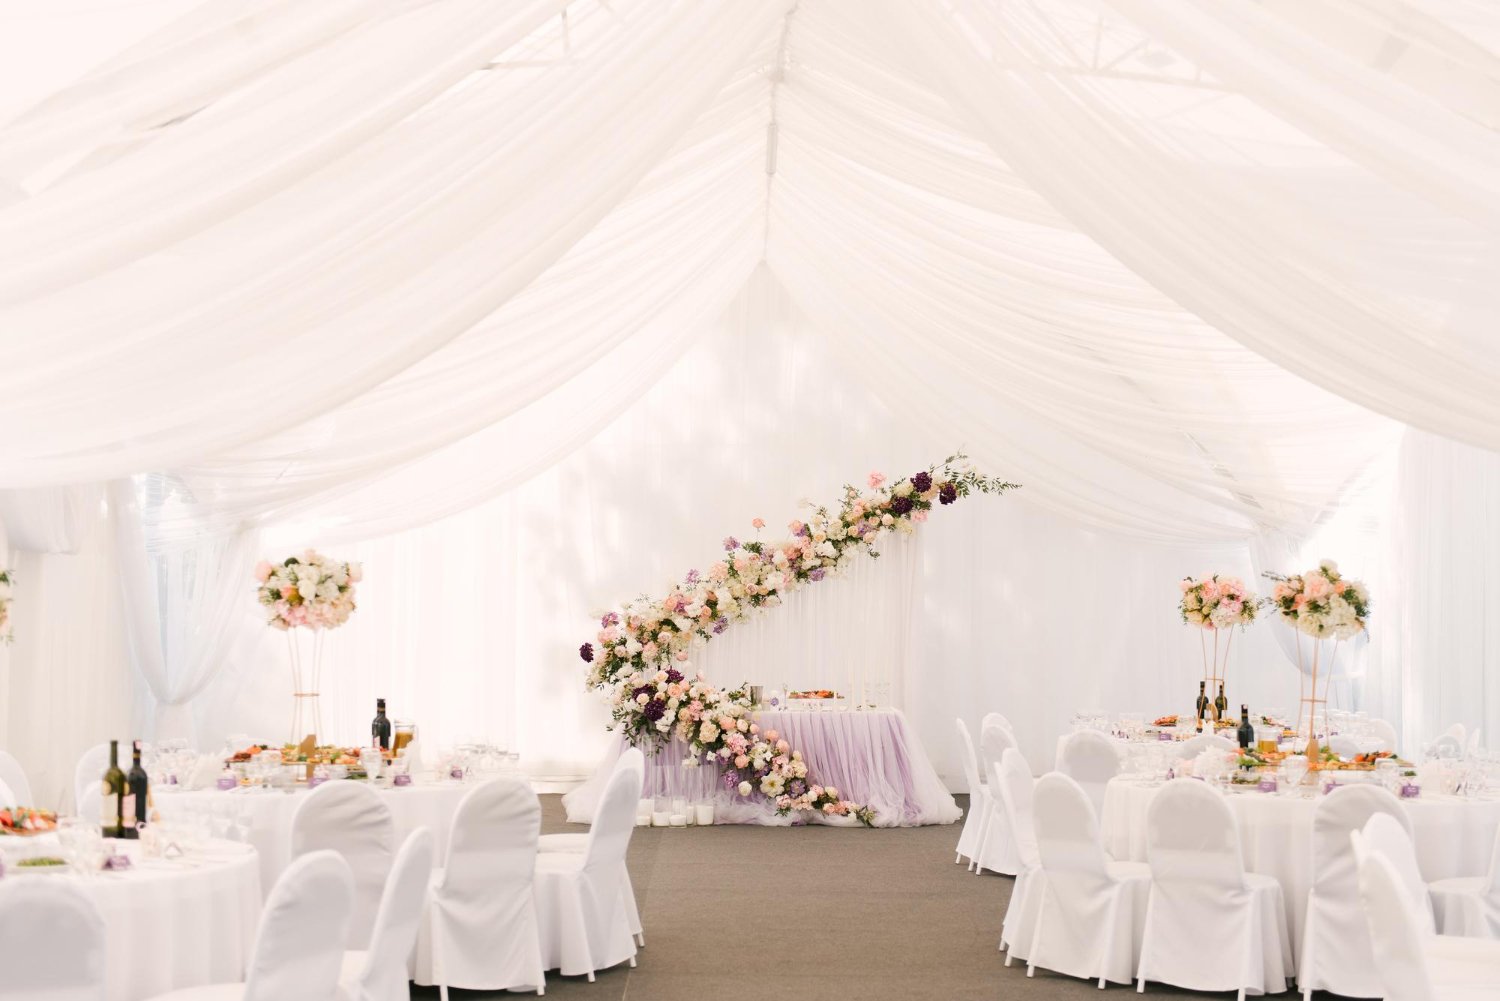 uxury wedding dinner in a large beautiful tent beautiful decor for the wedding